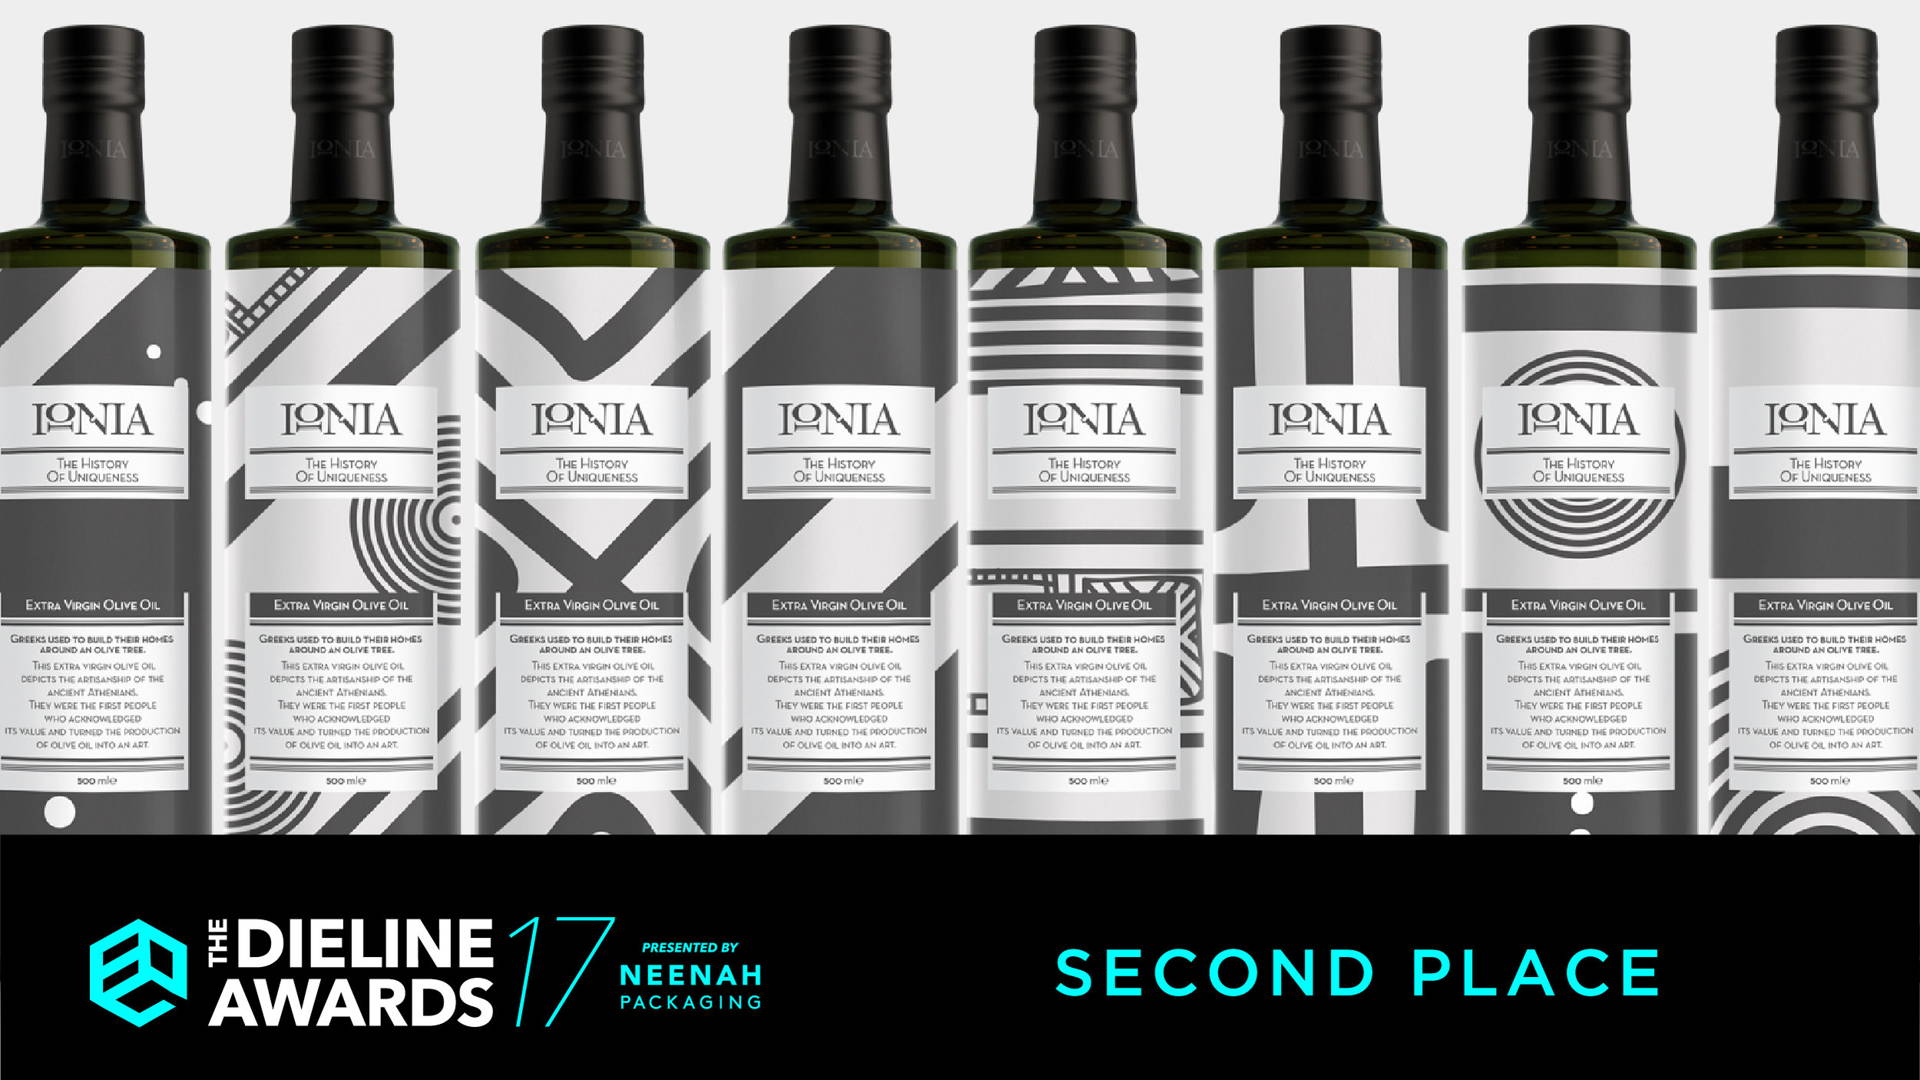 Featured image for The Dieline Awards 2017: IONIA Limited Edition 